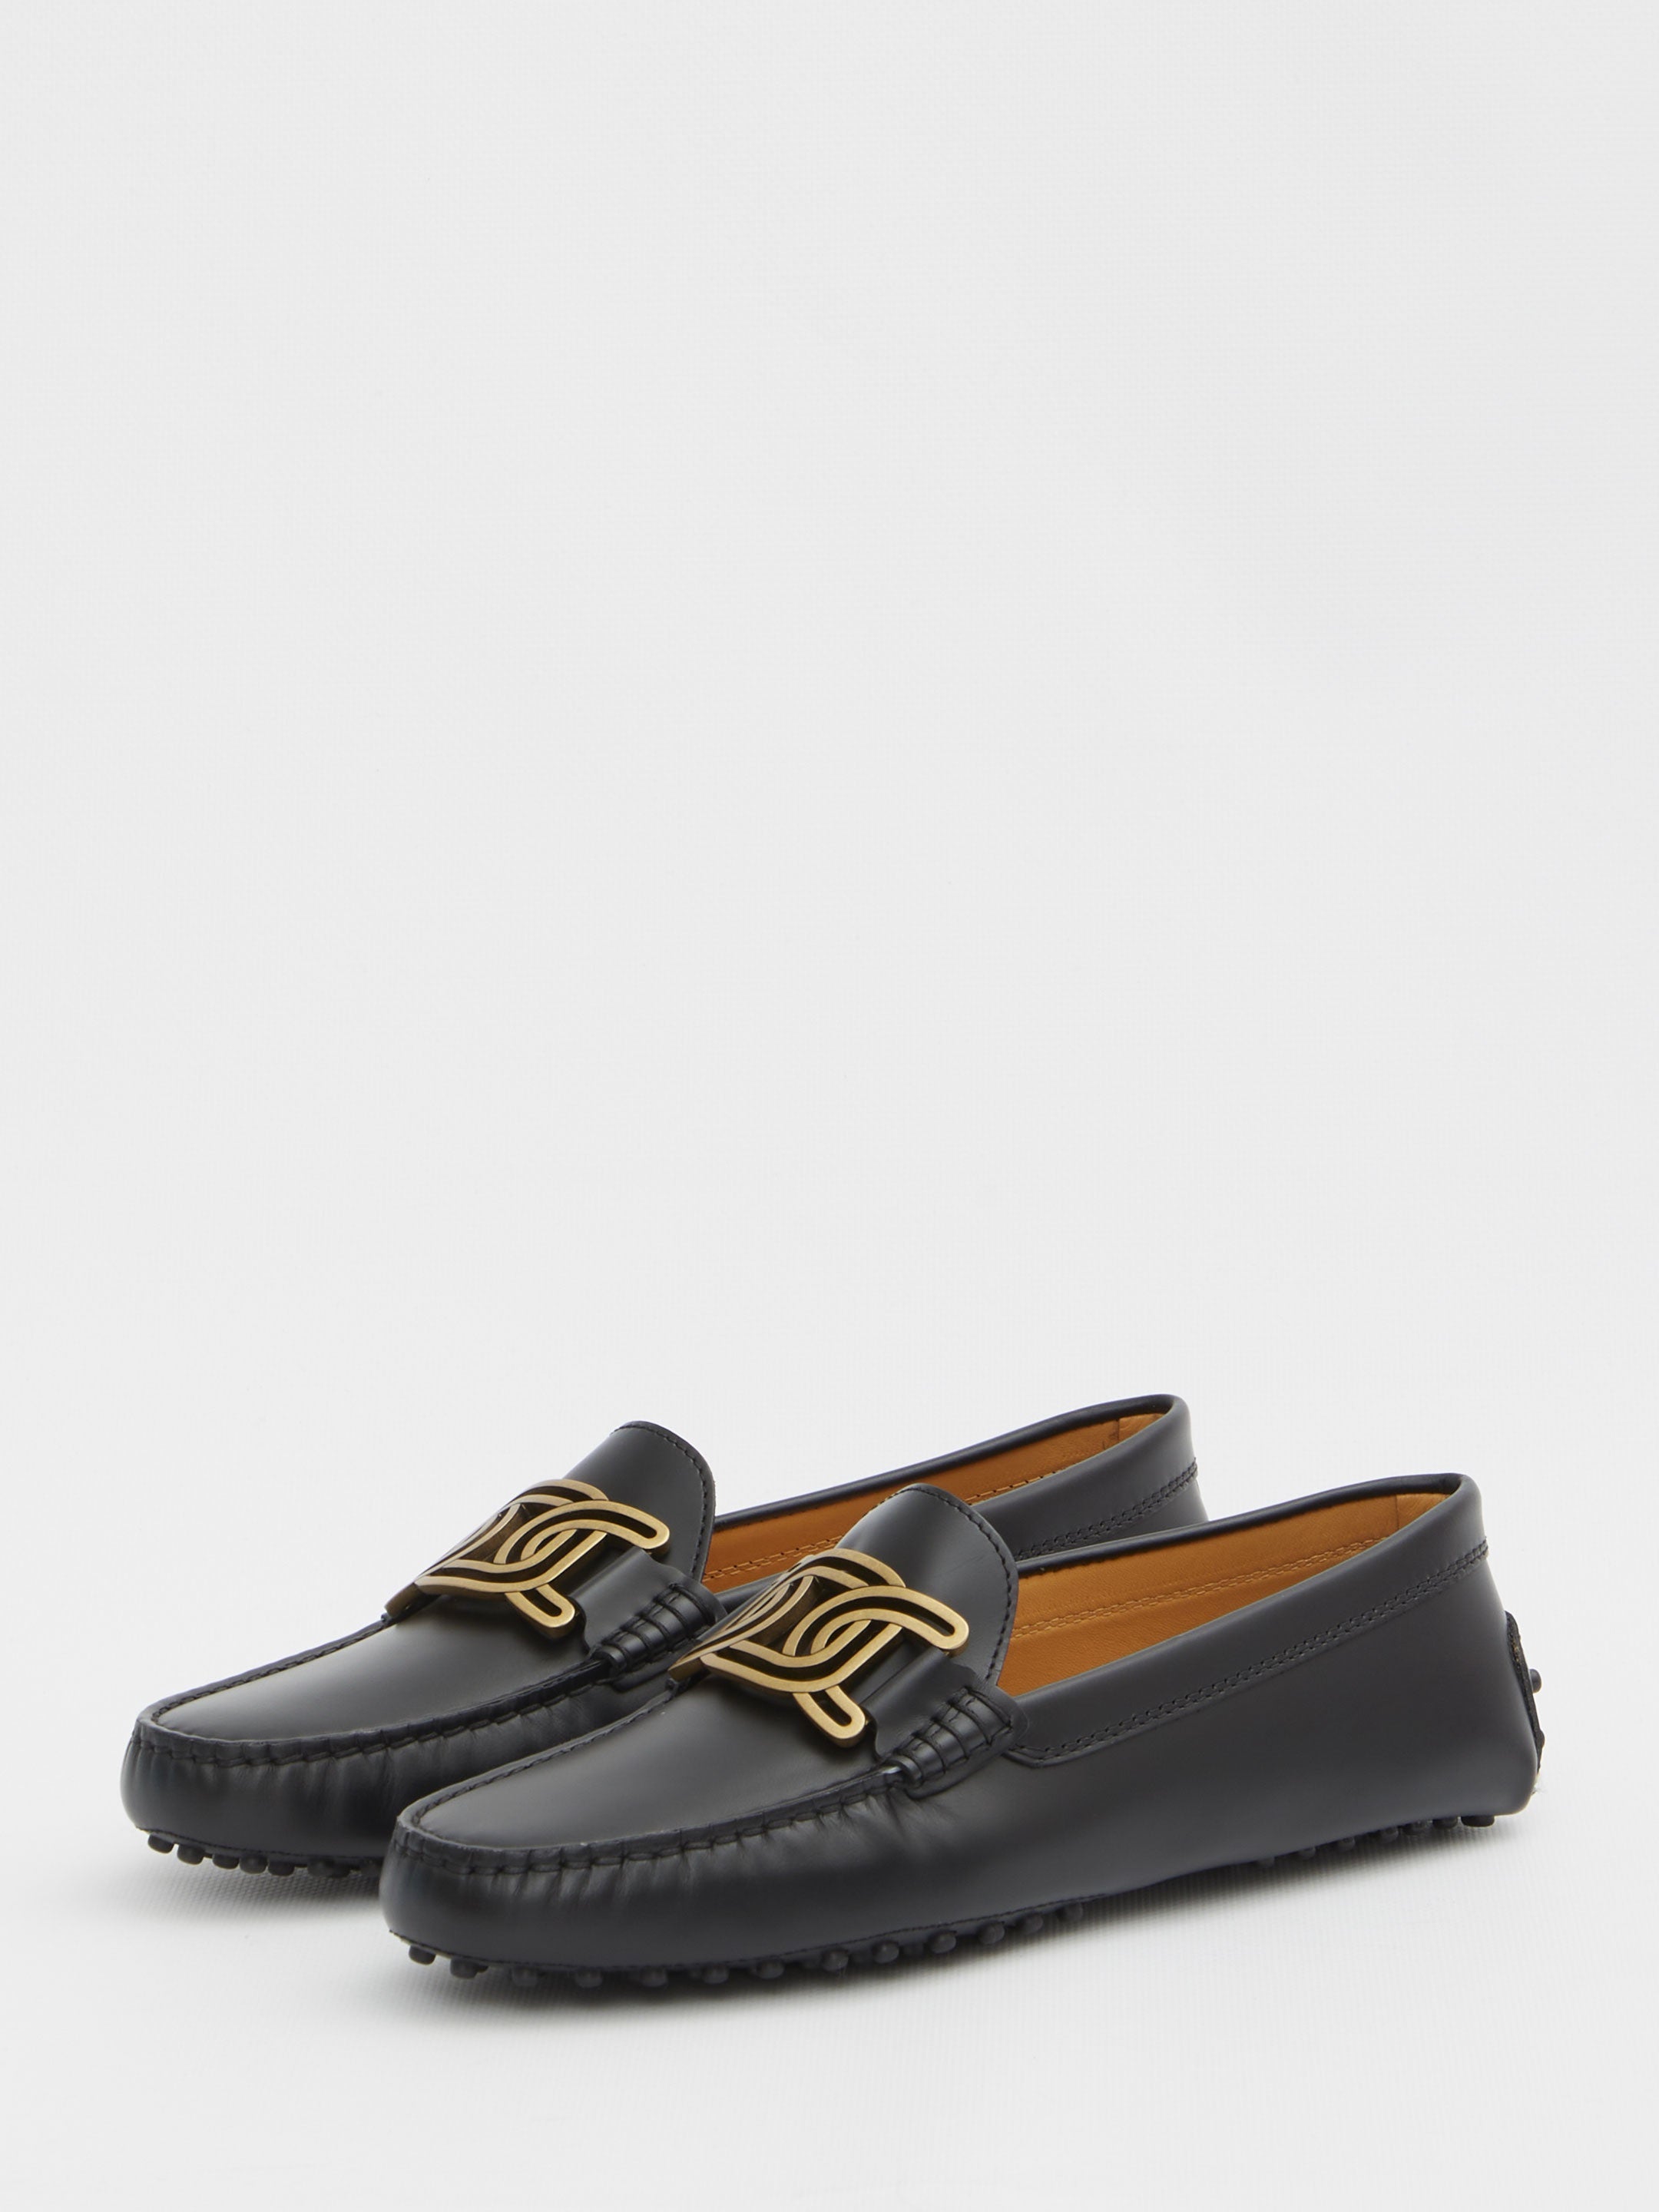 TODS-OUTLET-SALE-Kate-Gommino-loafers-Flache-Schuhe-36-12-BLACK-ARCHIVE-COLLECTION-2.jpg